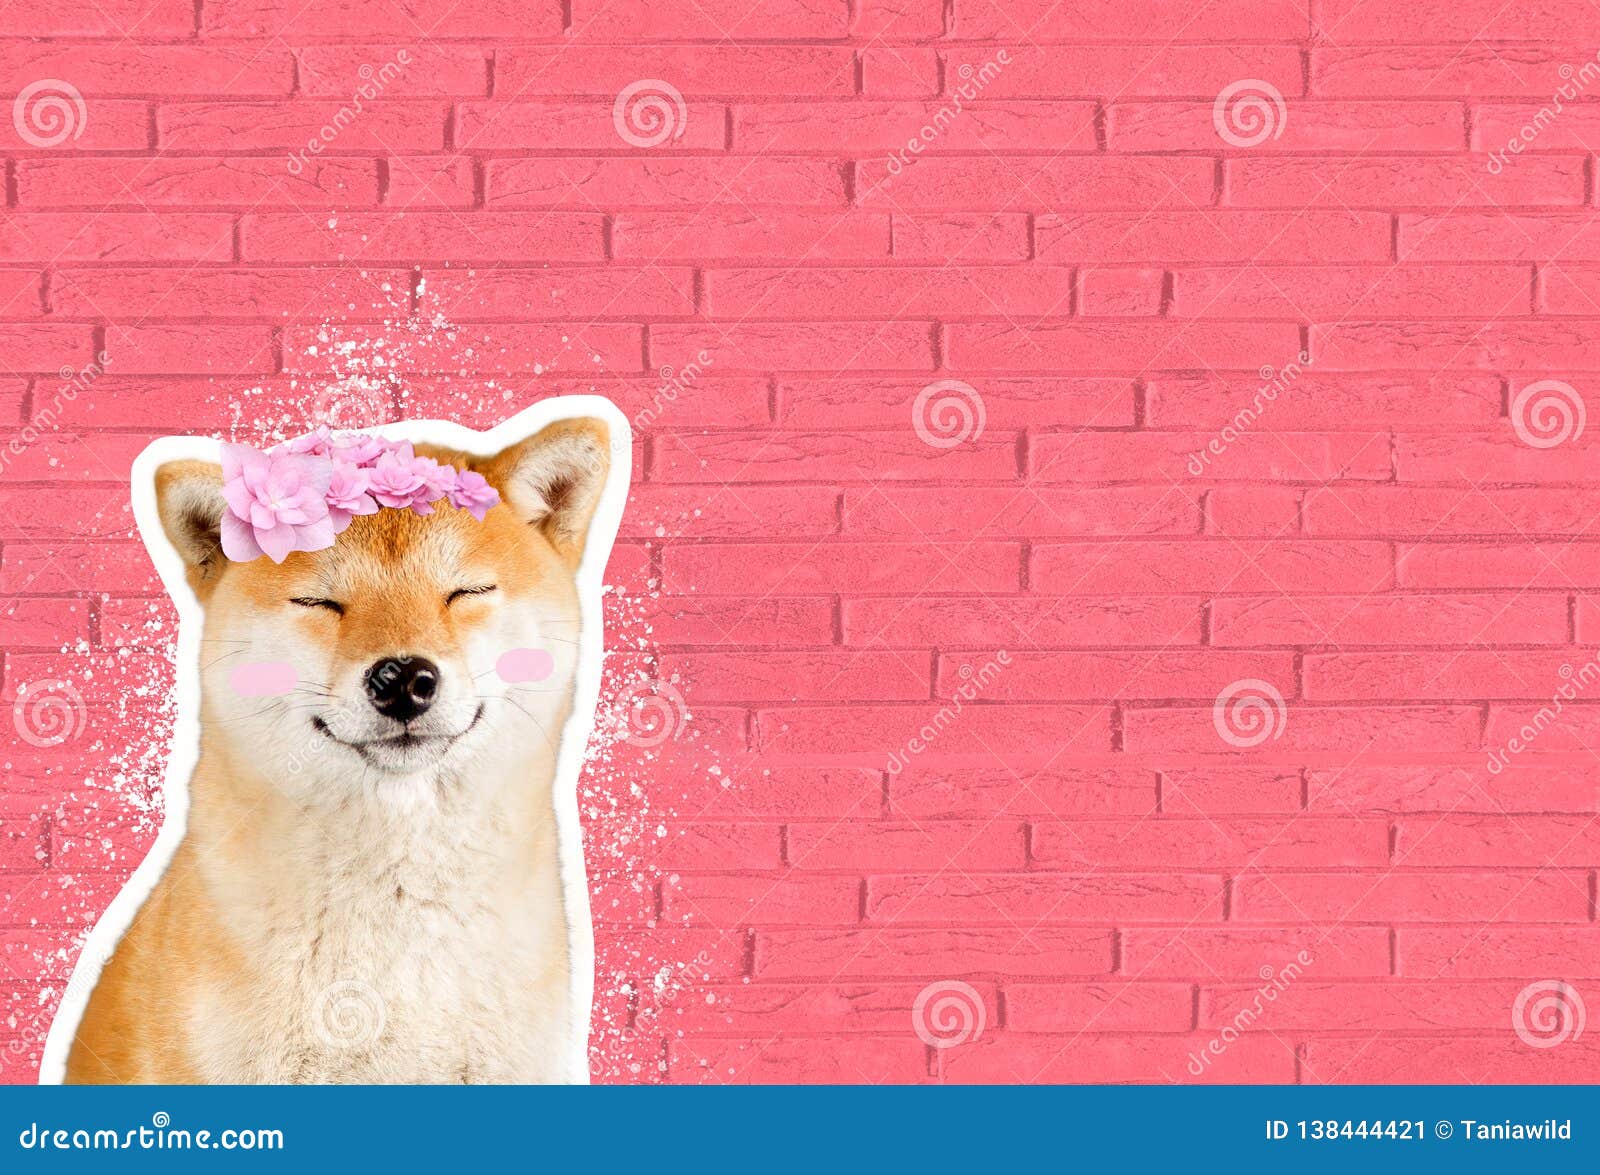 Happy Smiling Shiba Inu Dog in Front of Pink Brick Wall, Funny Cartoon Zine  Style Stock Illustration - Illustration of entertainment, brick: 138444421